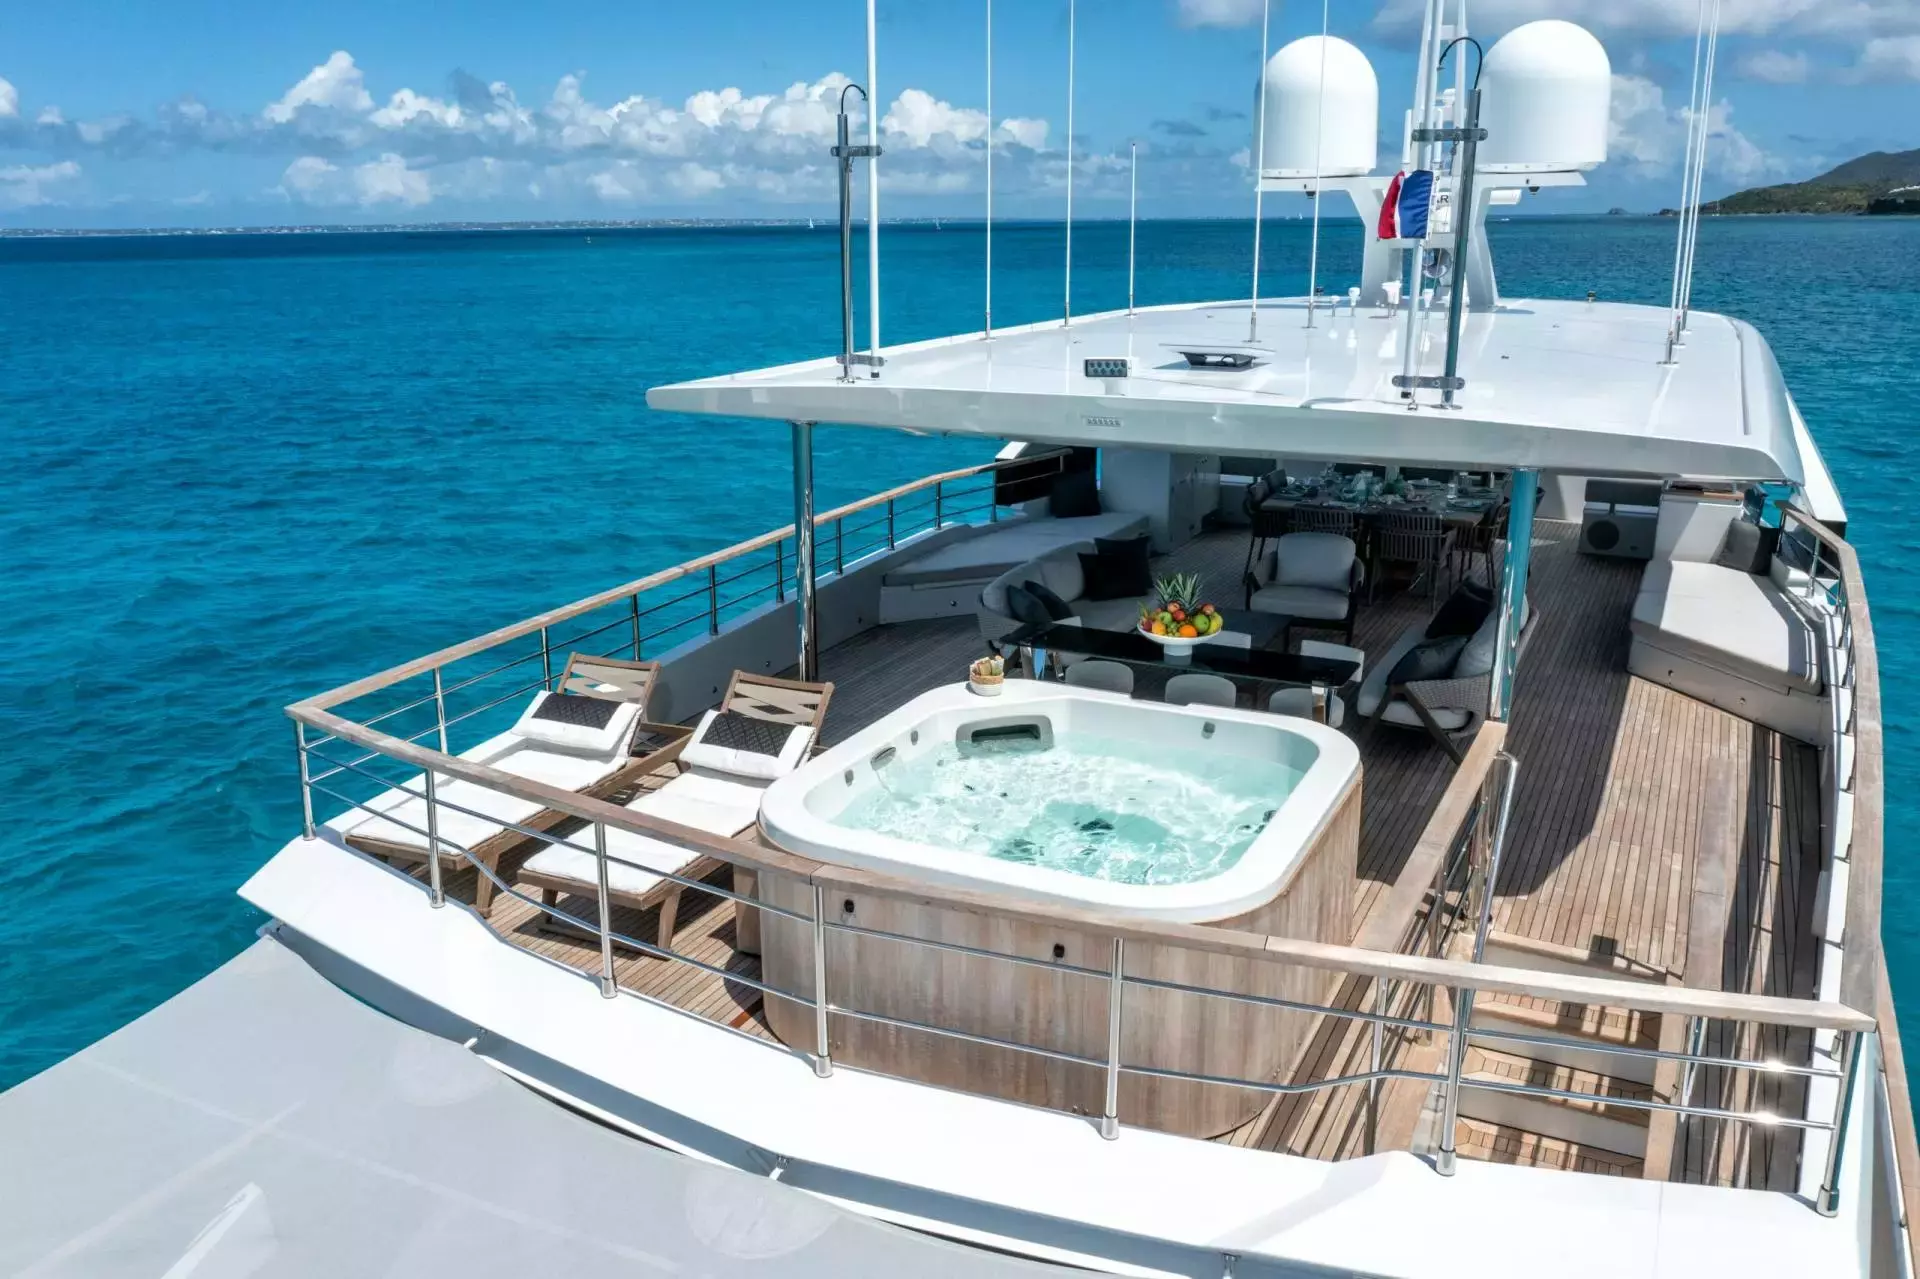 Rockit by Numarine - Top rates for a Charter of a private Superyacht in St Martin